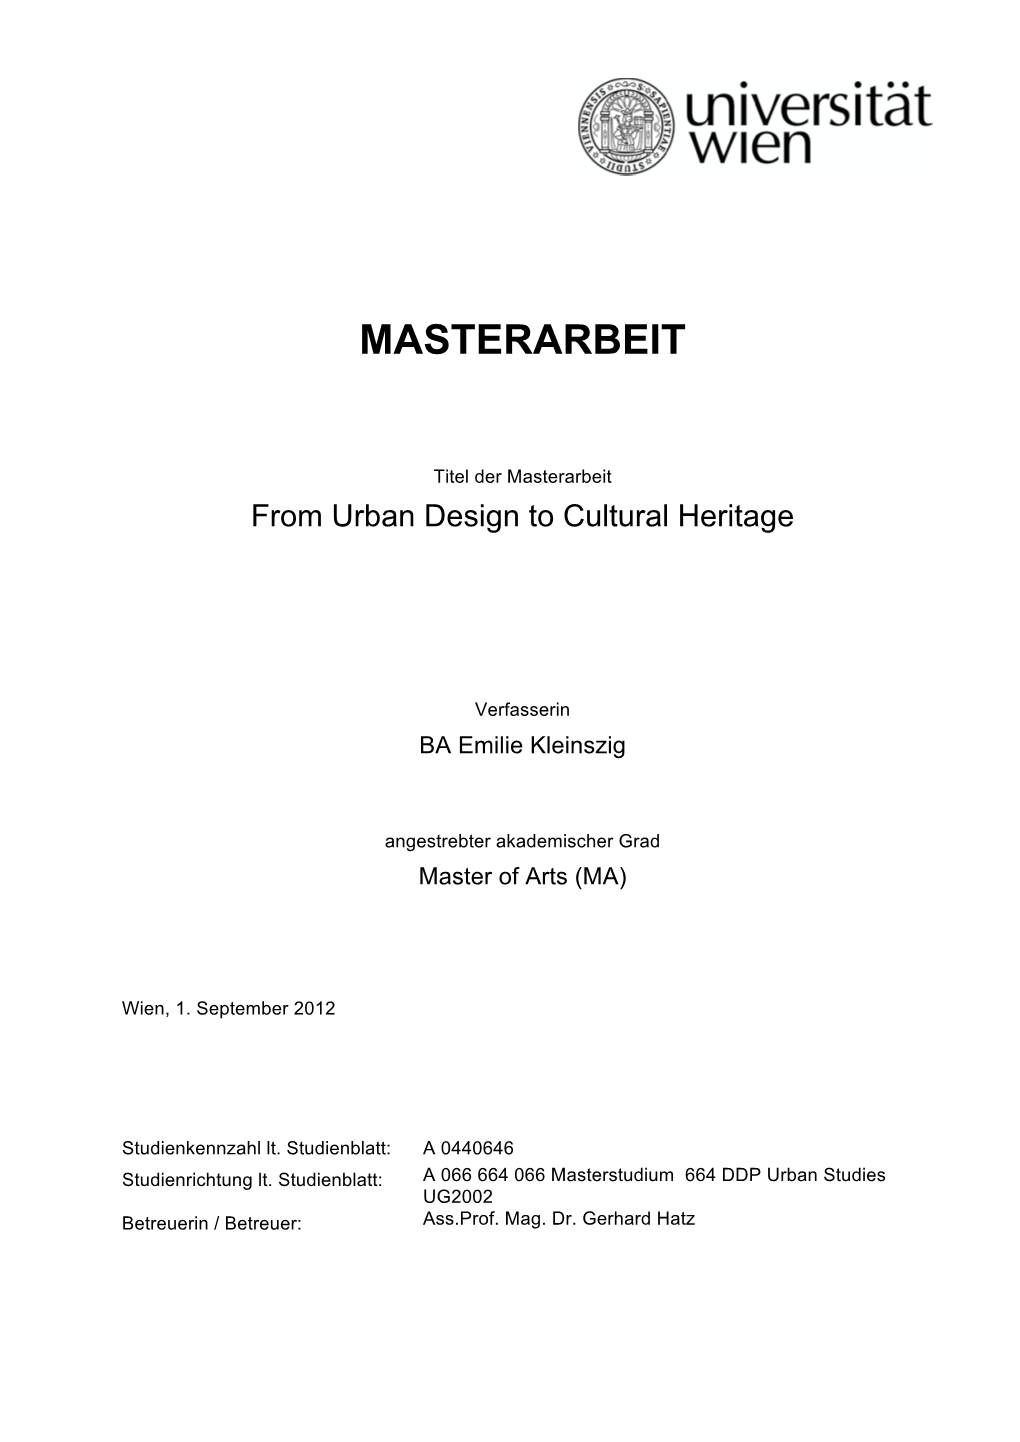 From Urban Design to Cultural Heritage